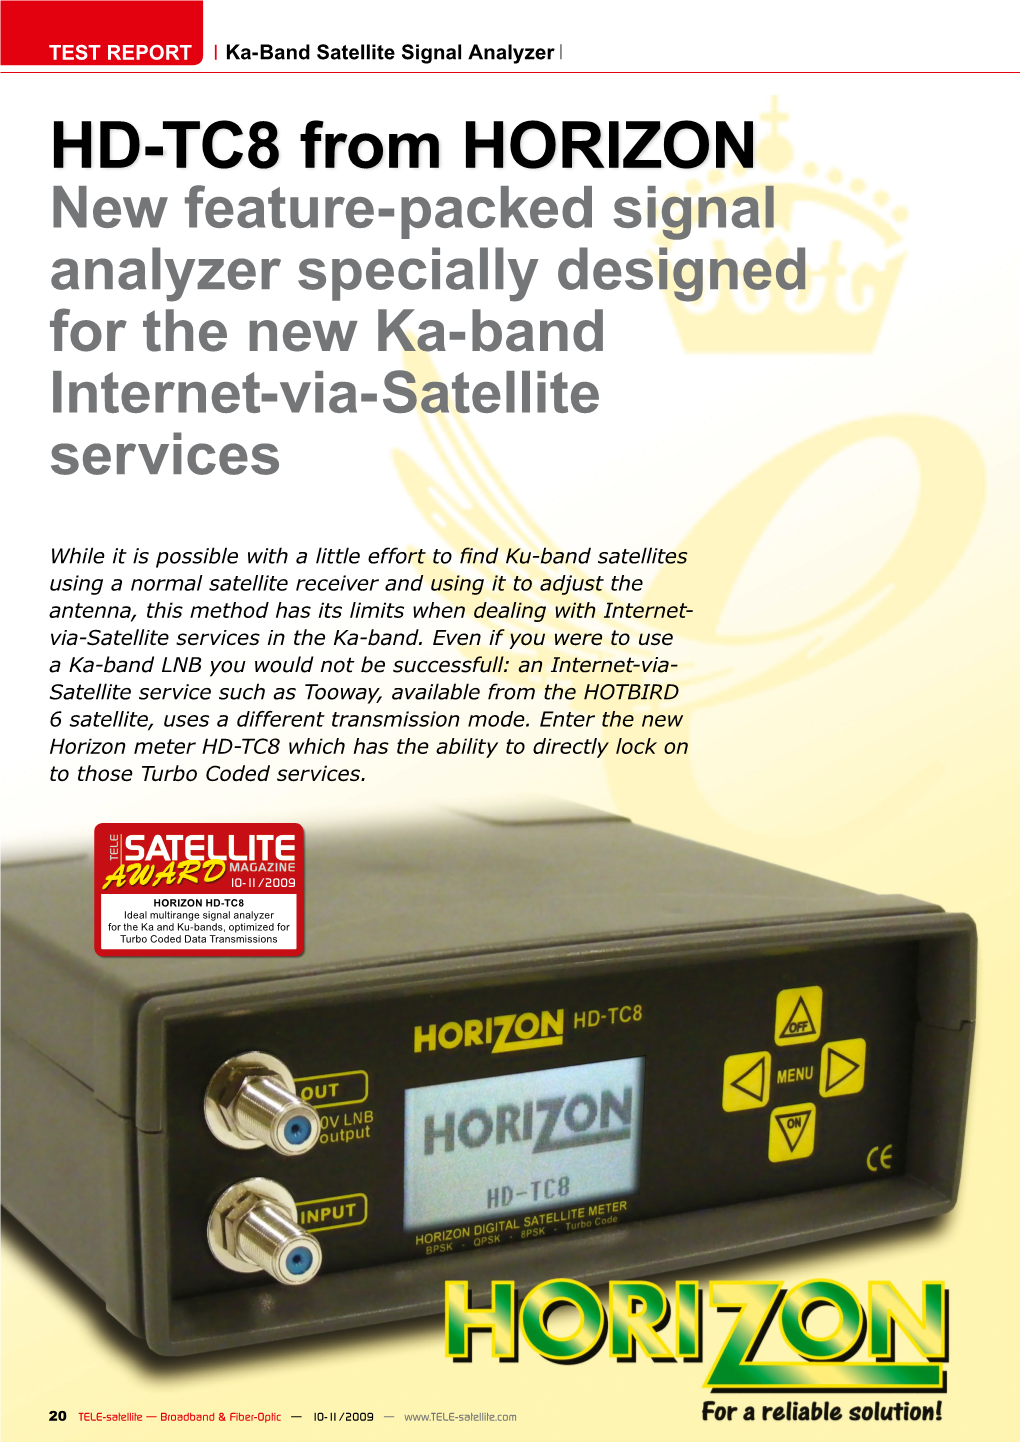 HD-TC8 from HORIZON New Feature-Packed Signal Analyzer Specially Designed for the New Ka-Band Internet-Via-Satellite Services